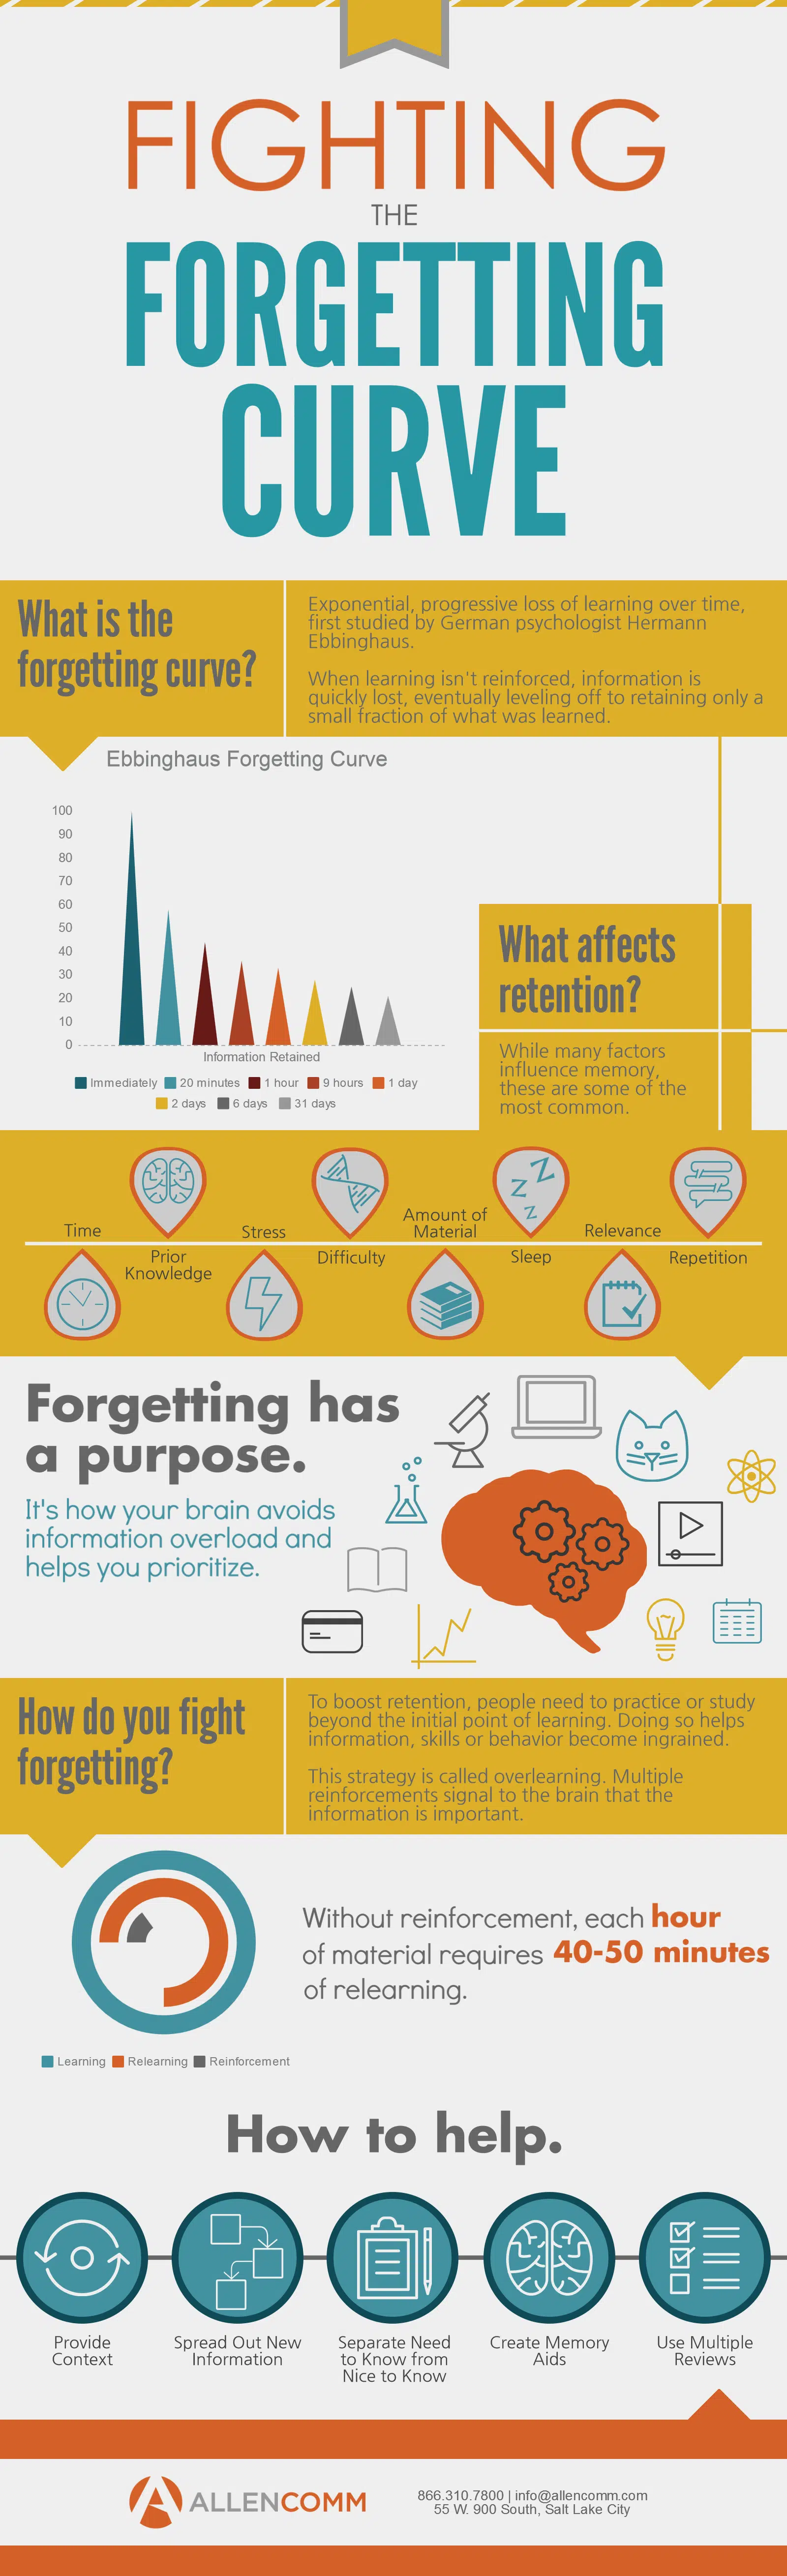 Forgetting curve infographic